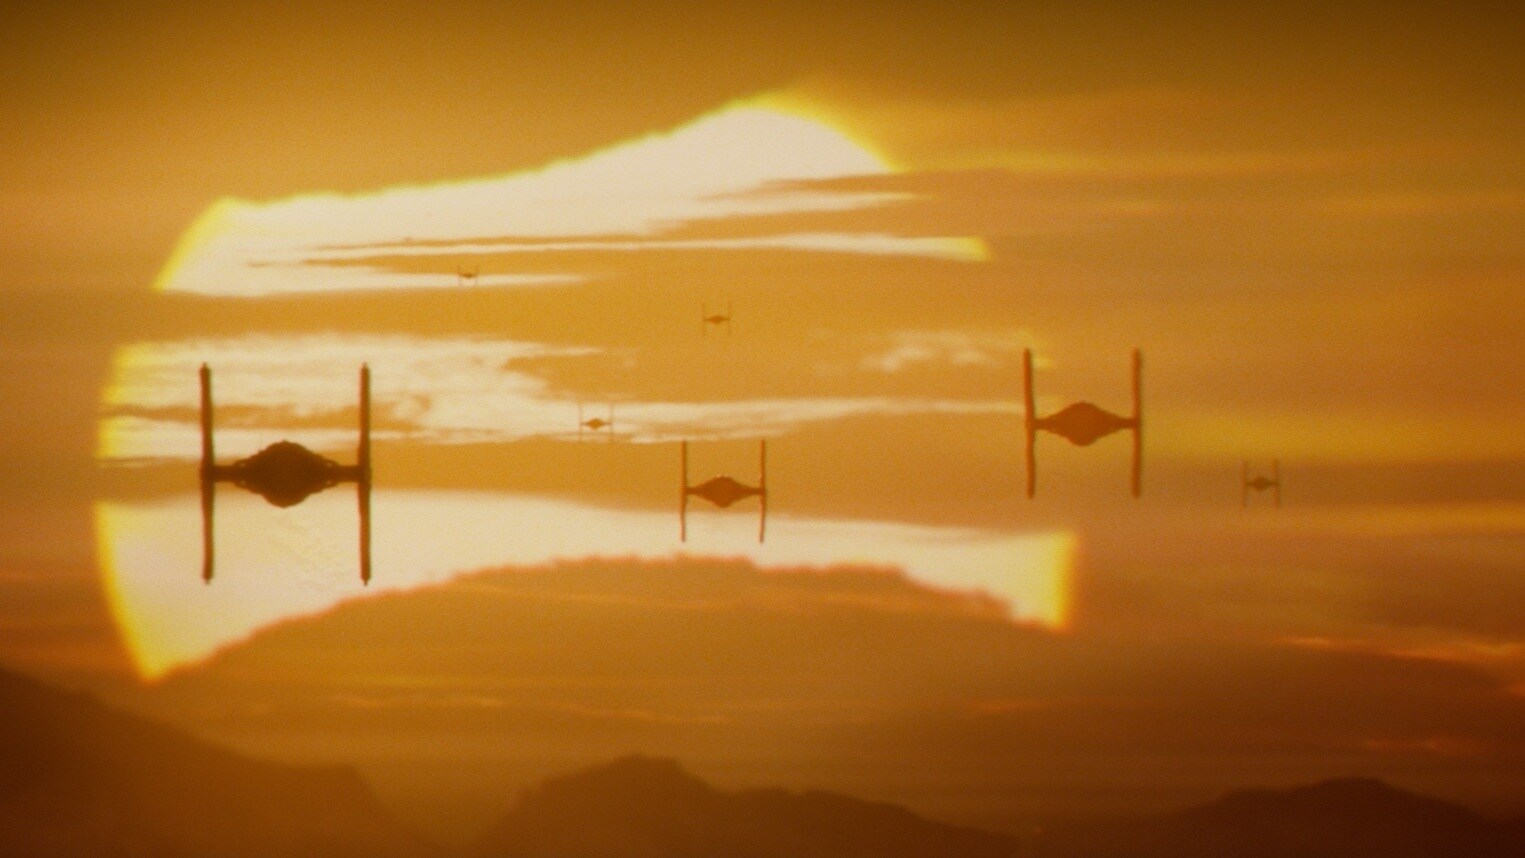 6 Ways to Prepare for Star Wars: The Force Awakens